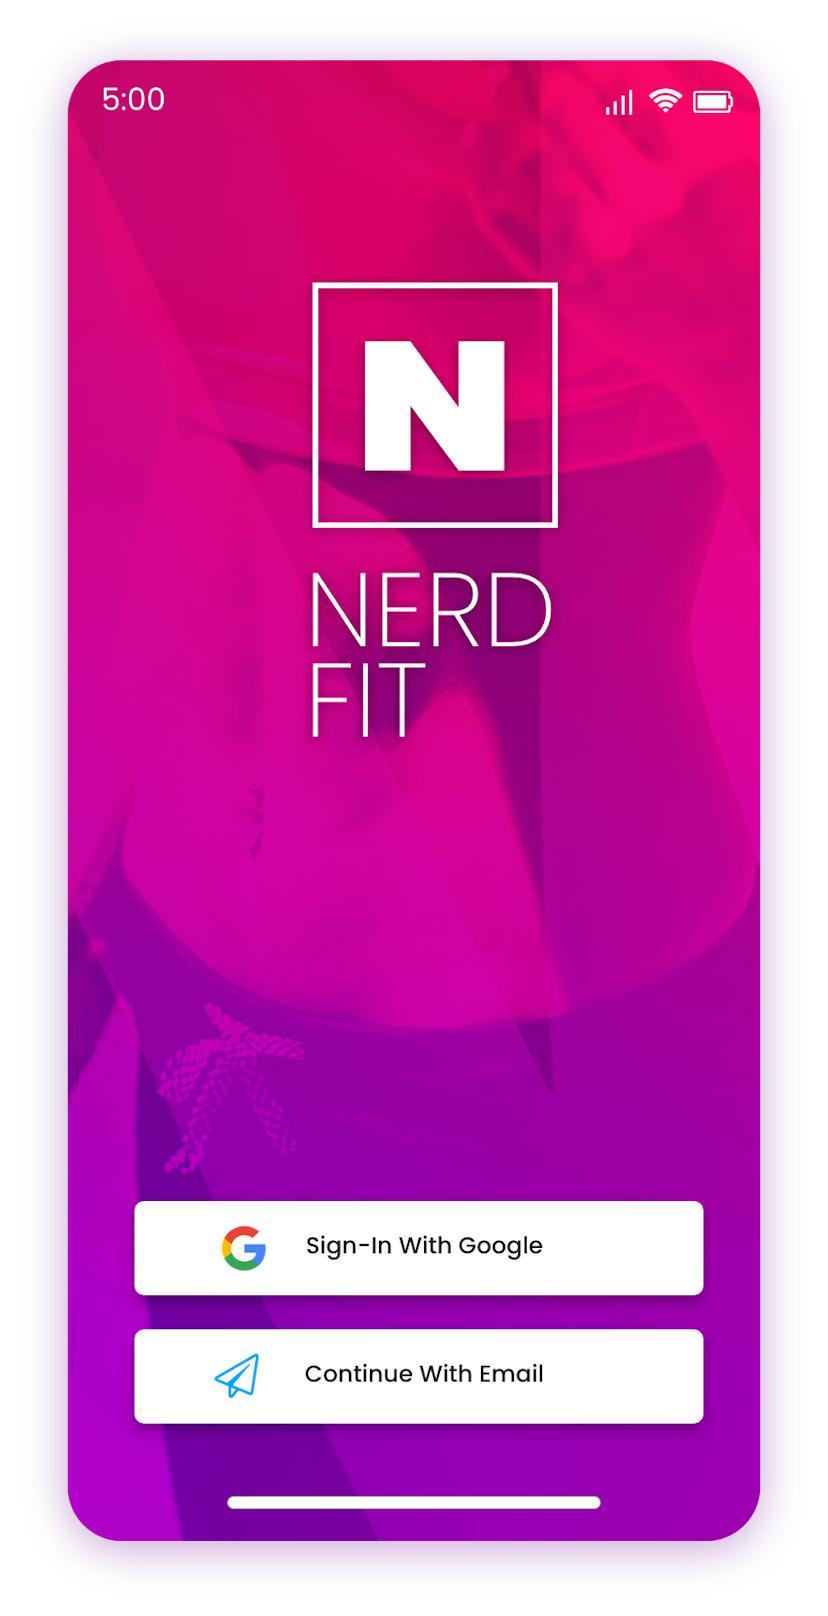 Nerd Fit fitness app for workout tracking and lifestyle modification. Built with Flutter for Android.